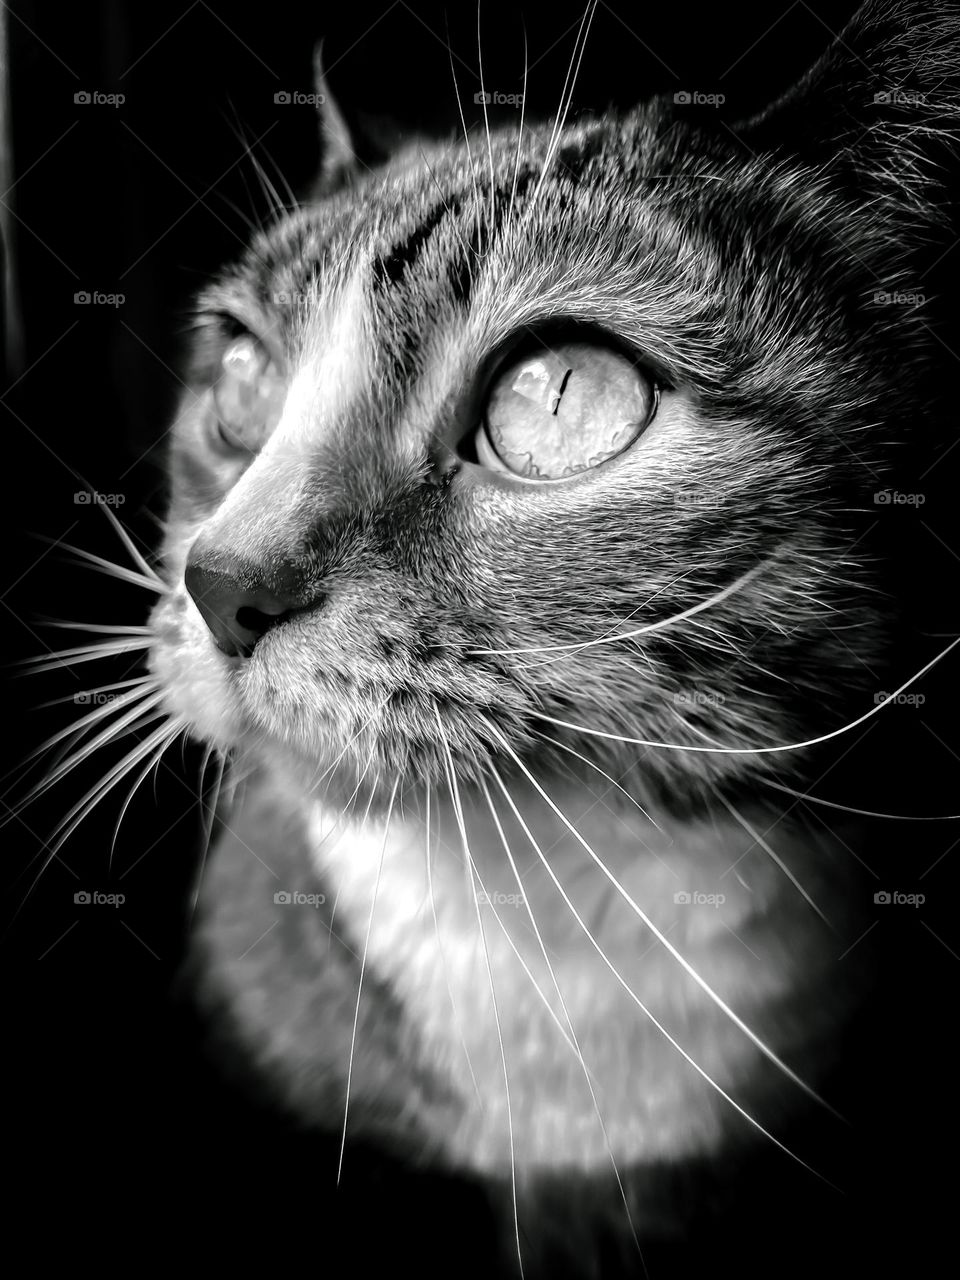 Cat kitty B&W black and white phone photography beautiful eyes big long whiskers tabby adorable pet animal no people moody pet cute best friend 